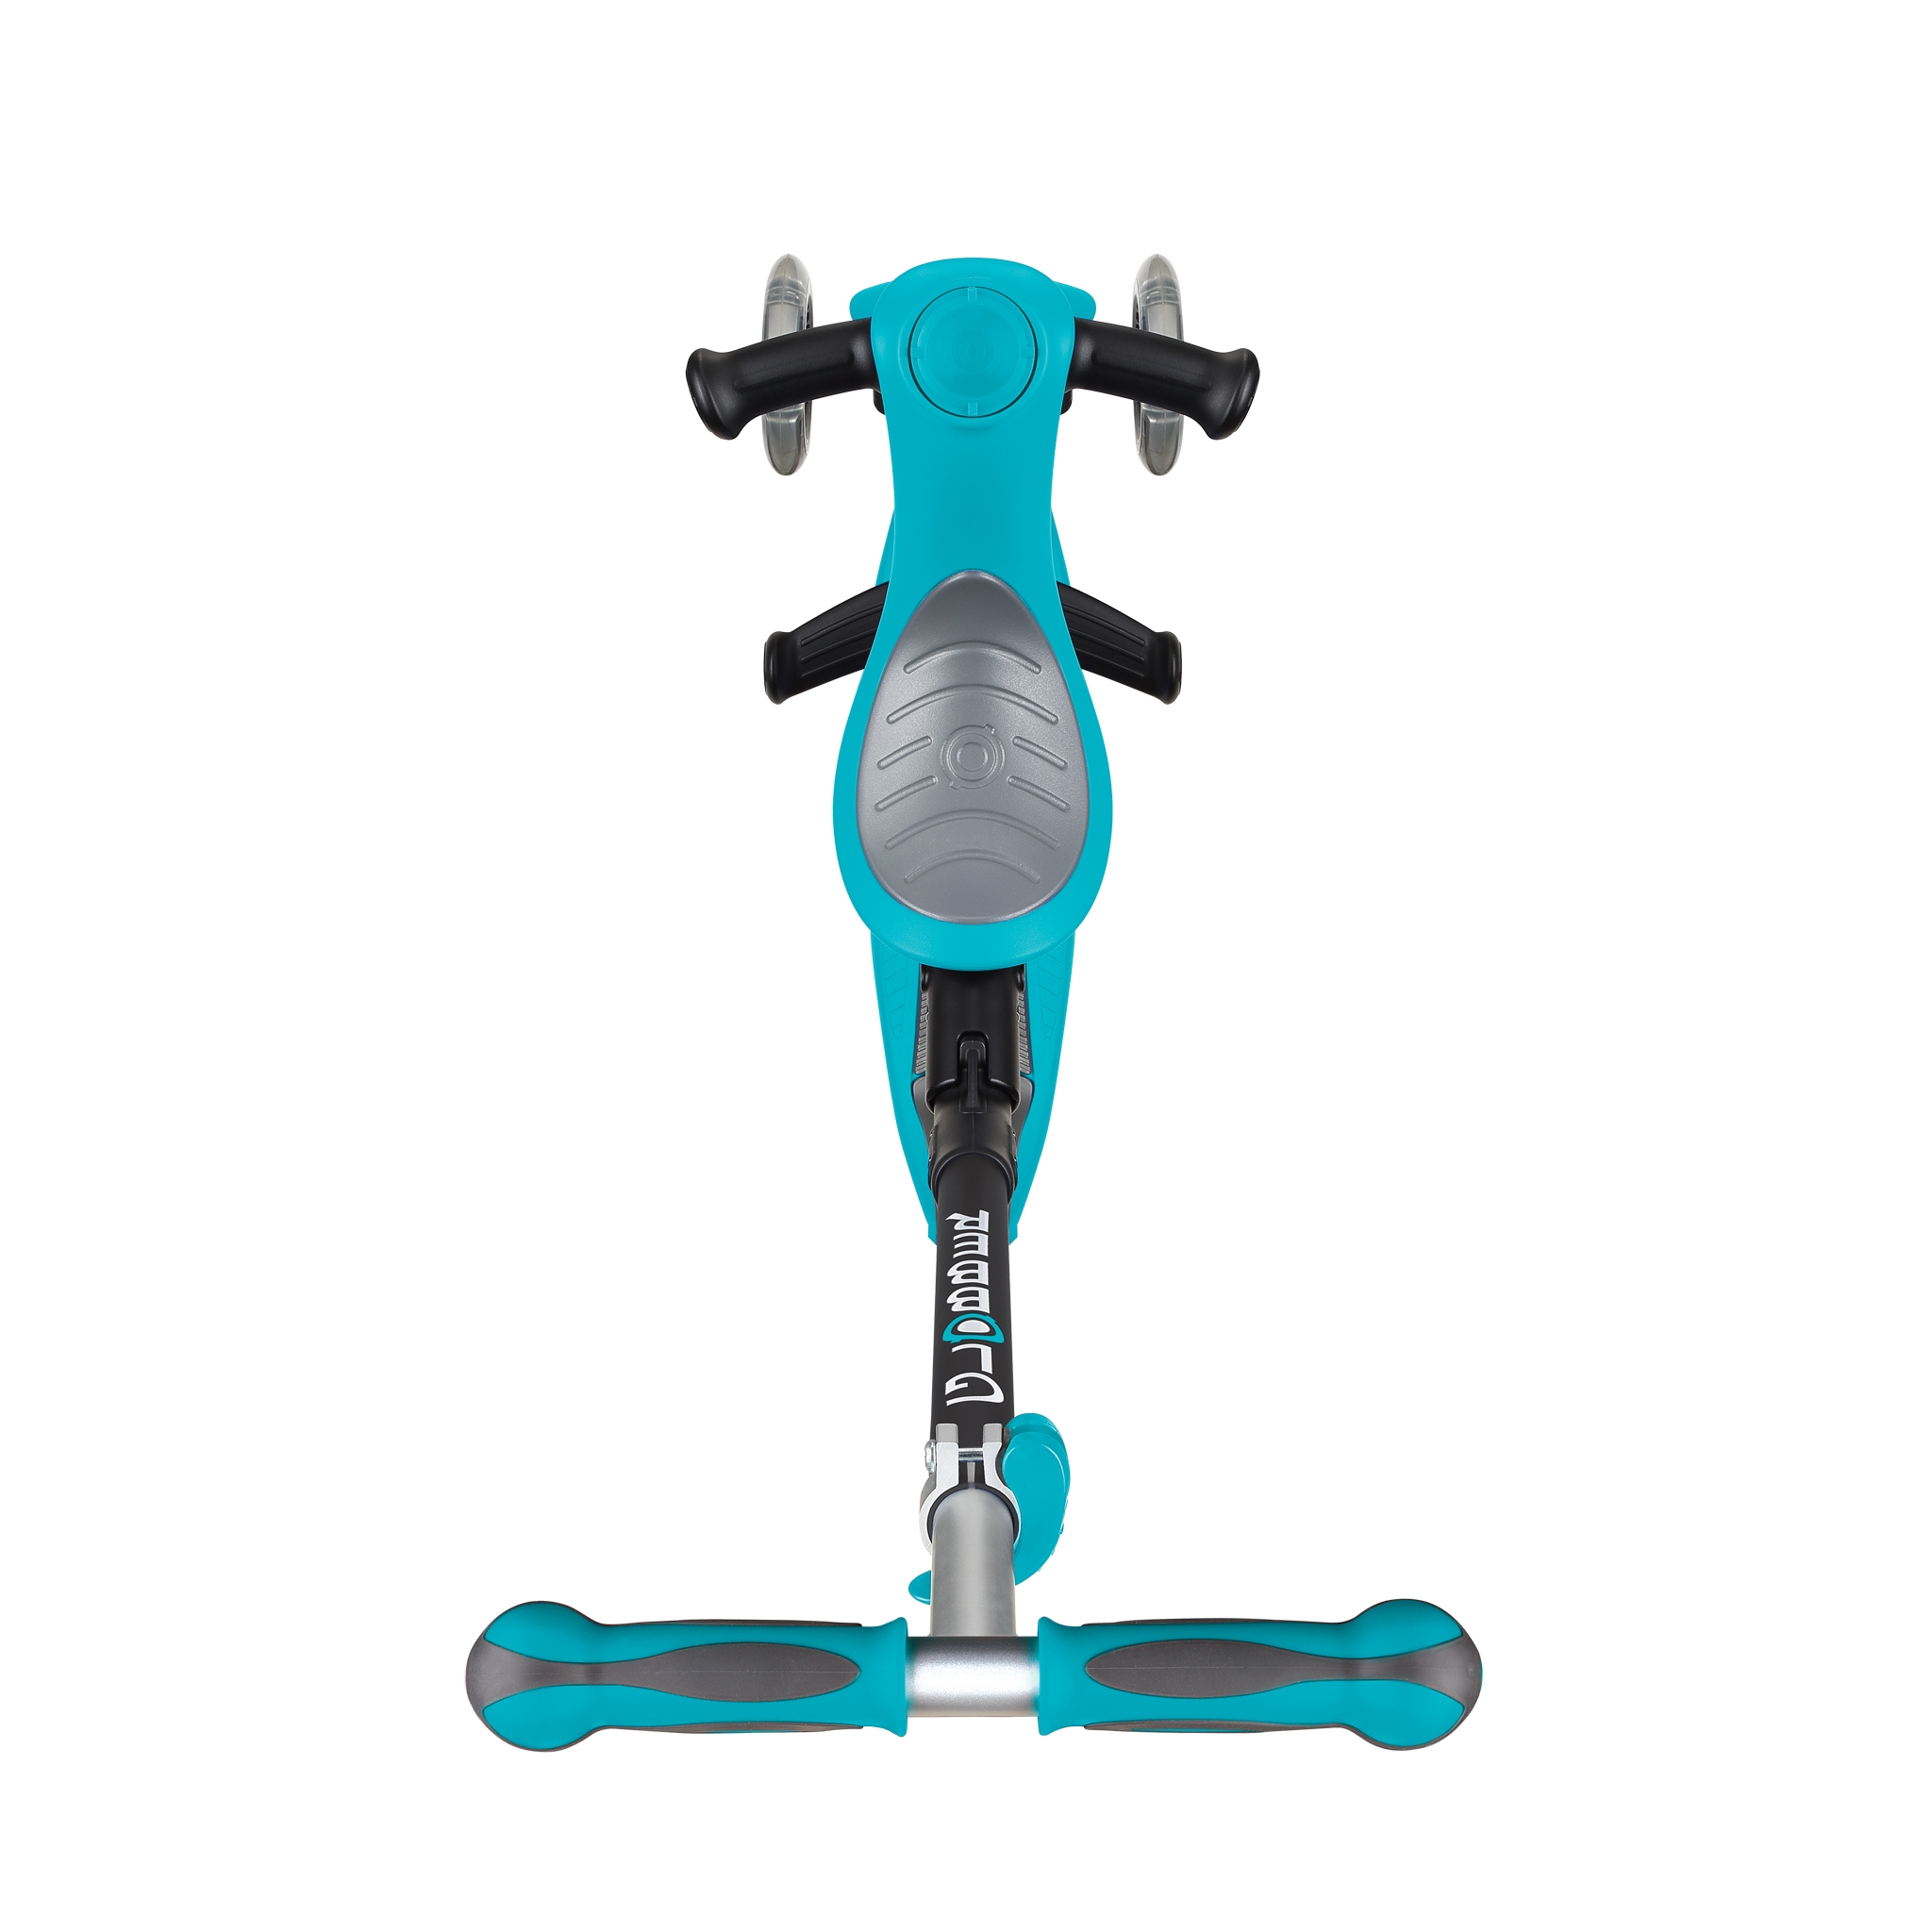 GO-UP-DELUXE-ride-on-walking-bike-scooter-with-extra-wide-3-height-adjustable-seat-teal 2